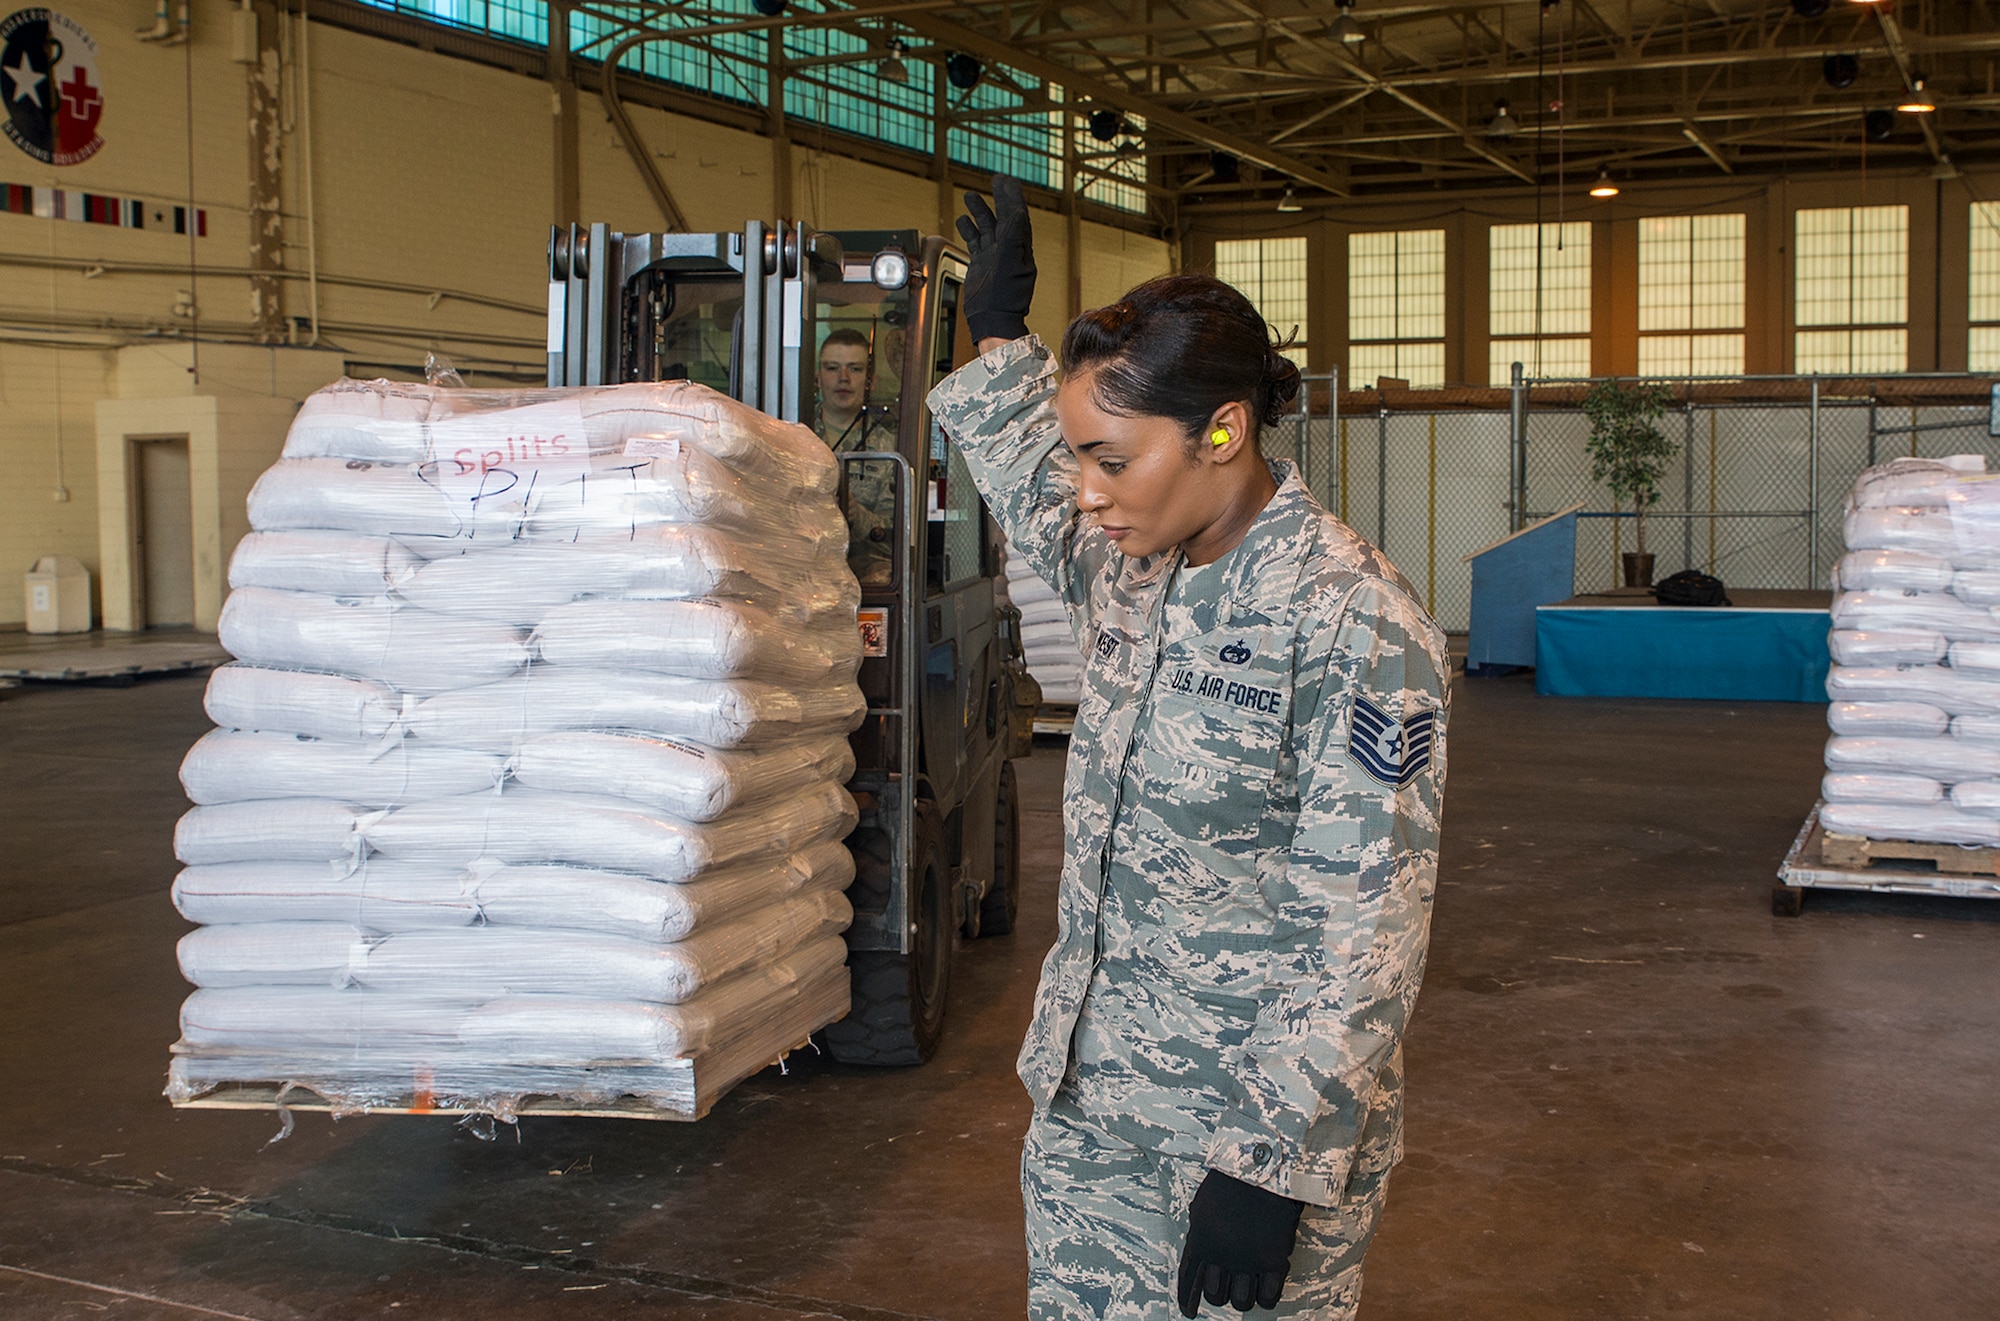 Tech. Sgt. Stephanie West, 502nd Logistics Readiness Squadron information controller, guides a load of rice and beans to an awaiting pallet May 11, 2016 at Joint Base San Antonio-Lackland, Texas. The 433rd Airlift Wing and 502nd Logistics Readiness Squadron worked together to ensure 90,000 pounds of food aid made it to Yoro, Honduras. (U.S. Air Force photo by Benjamin Faske) 